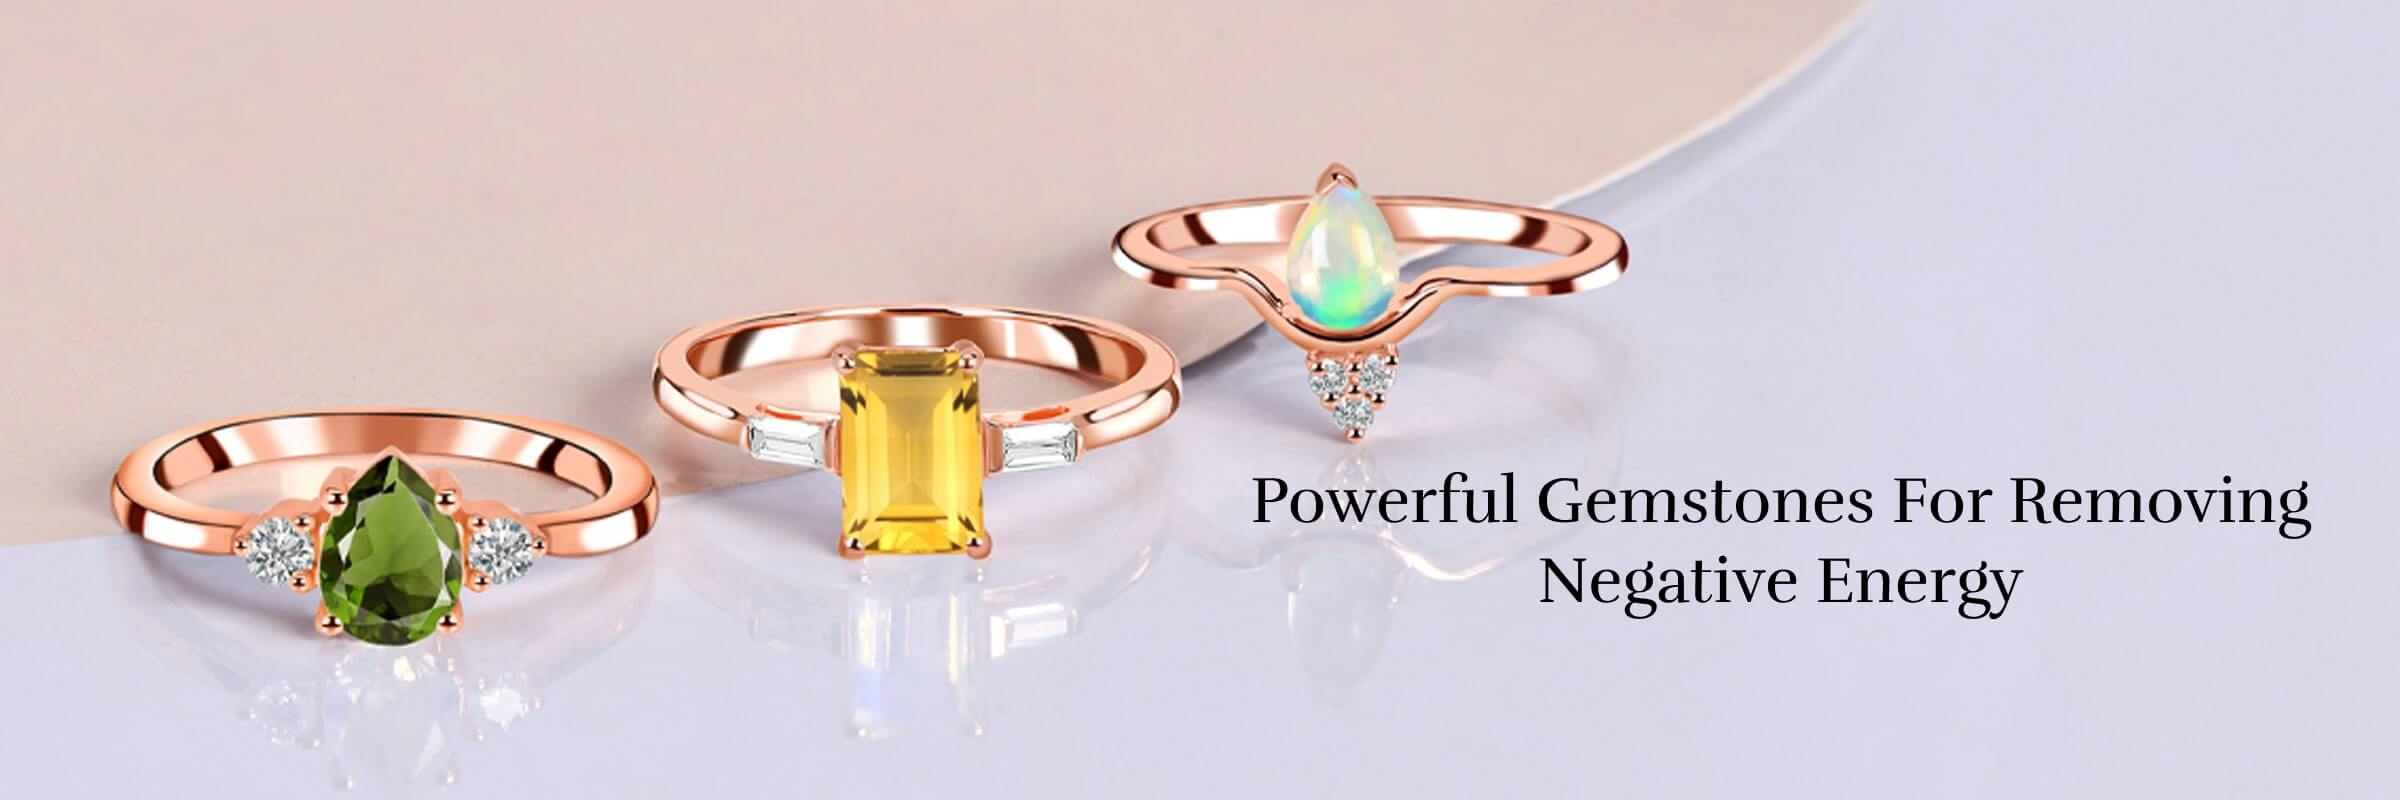 Does The Gemstone Remove Negative Energy? 1